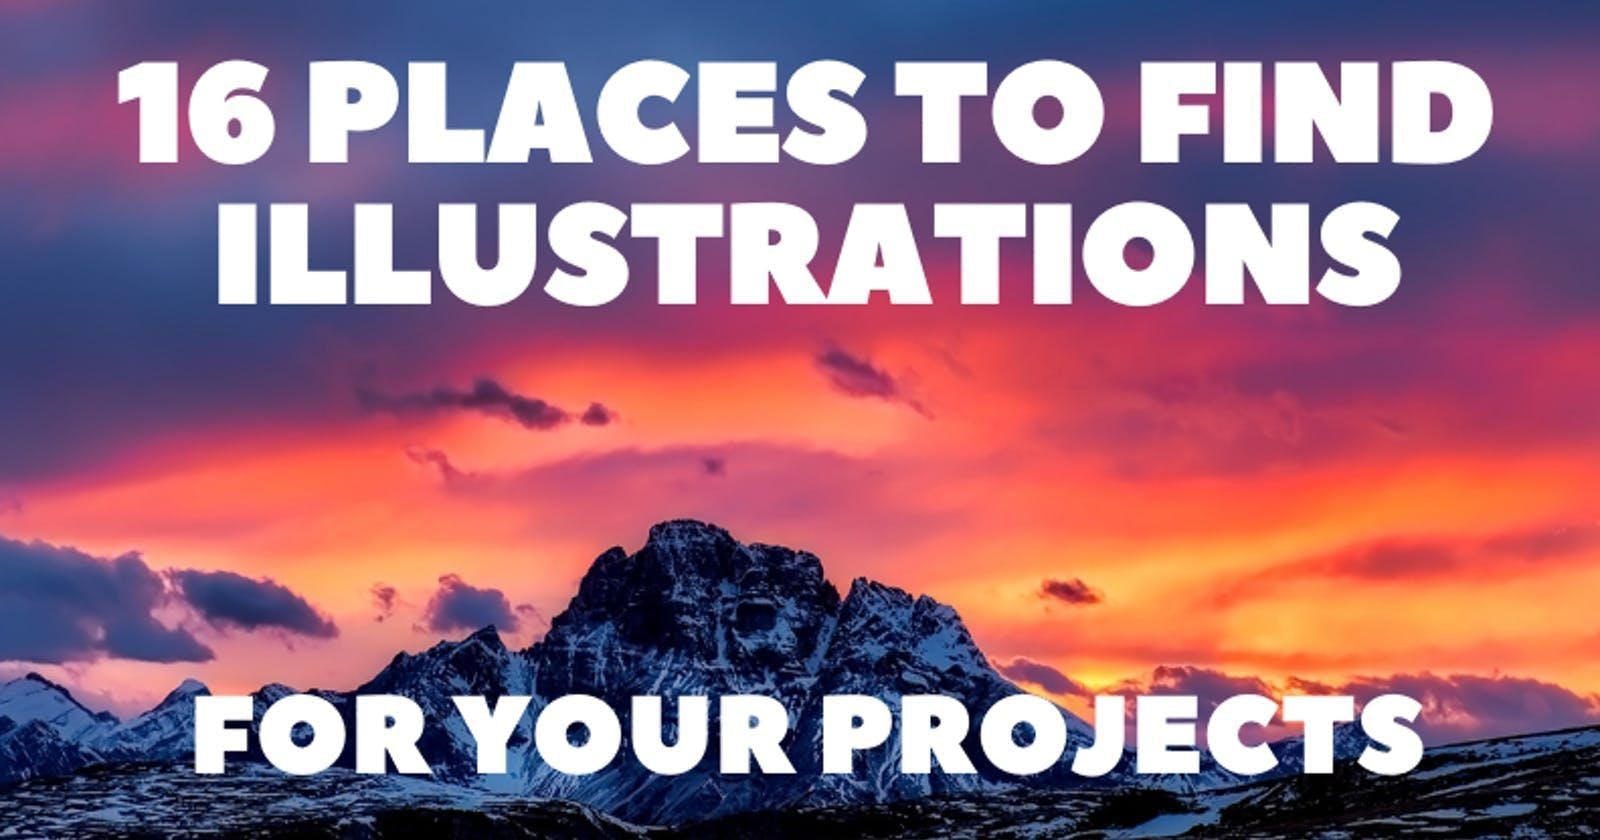 featured image - 16 Places to Find Illustrations for Your Projects 📚🎨